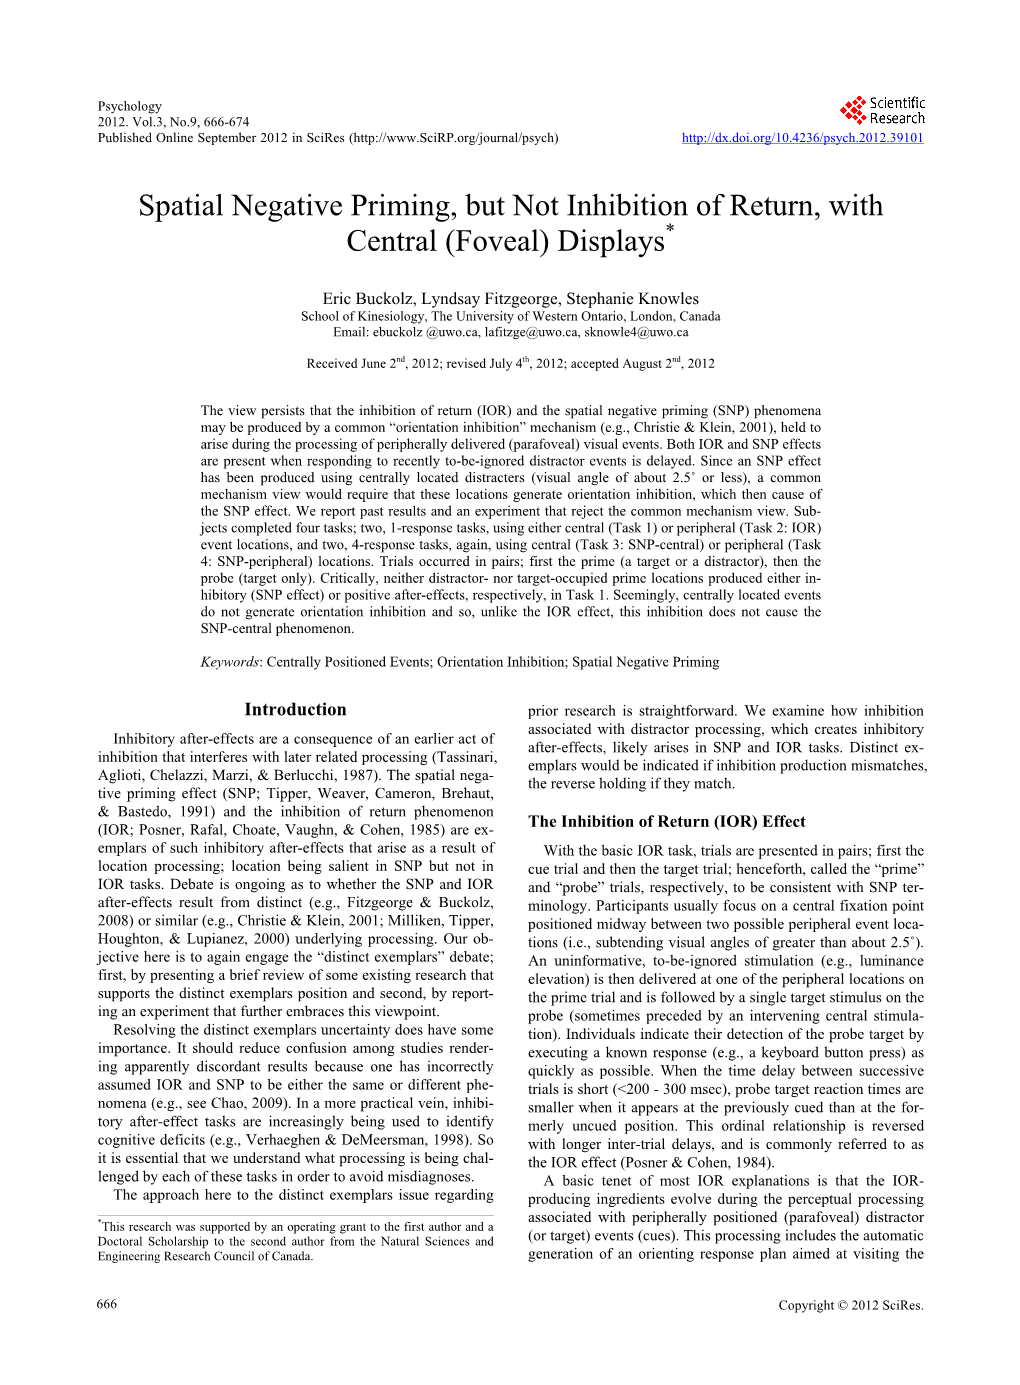 Spatial Negative Priming, but Not Inhibition of Return, with Central (Foveal) Displays*